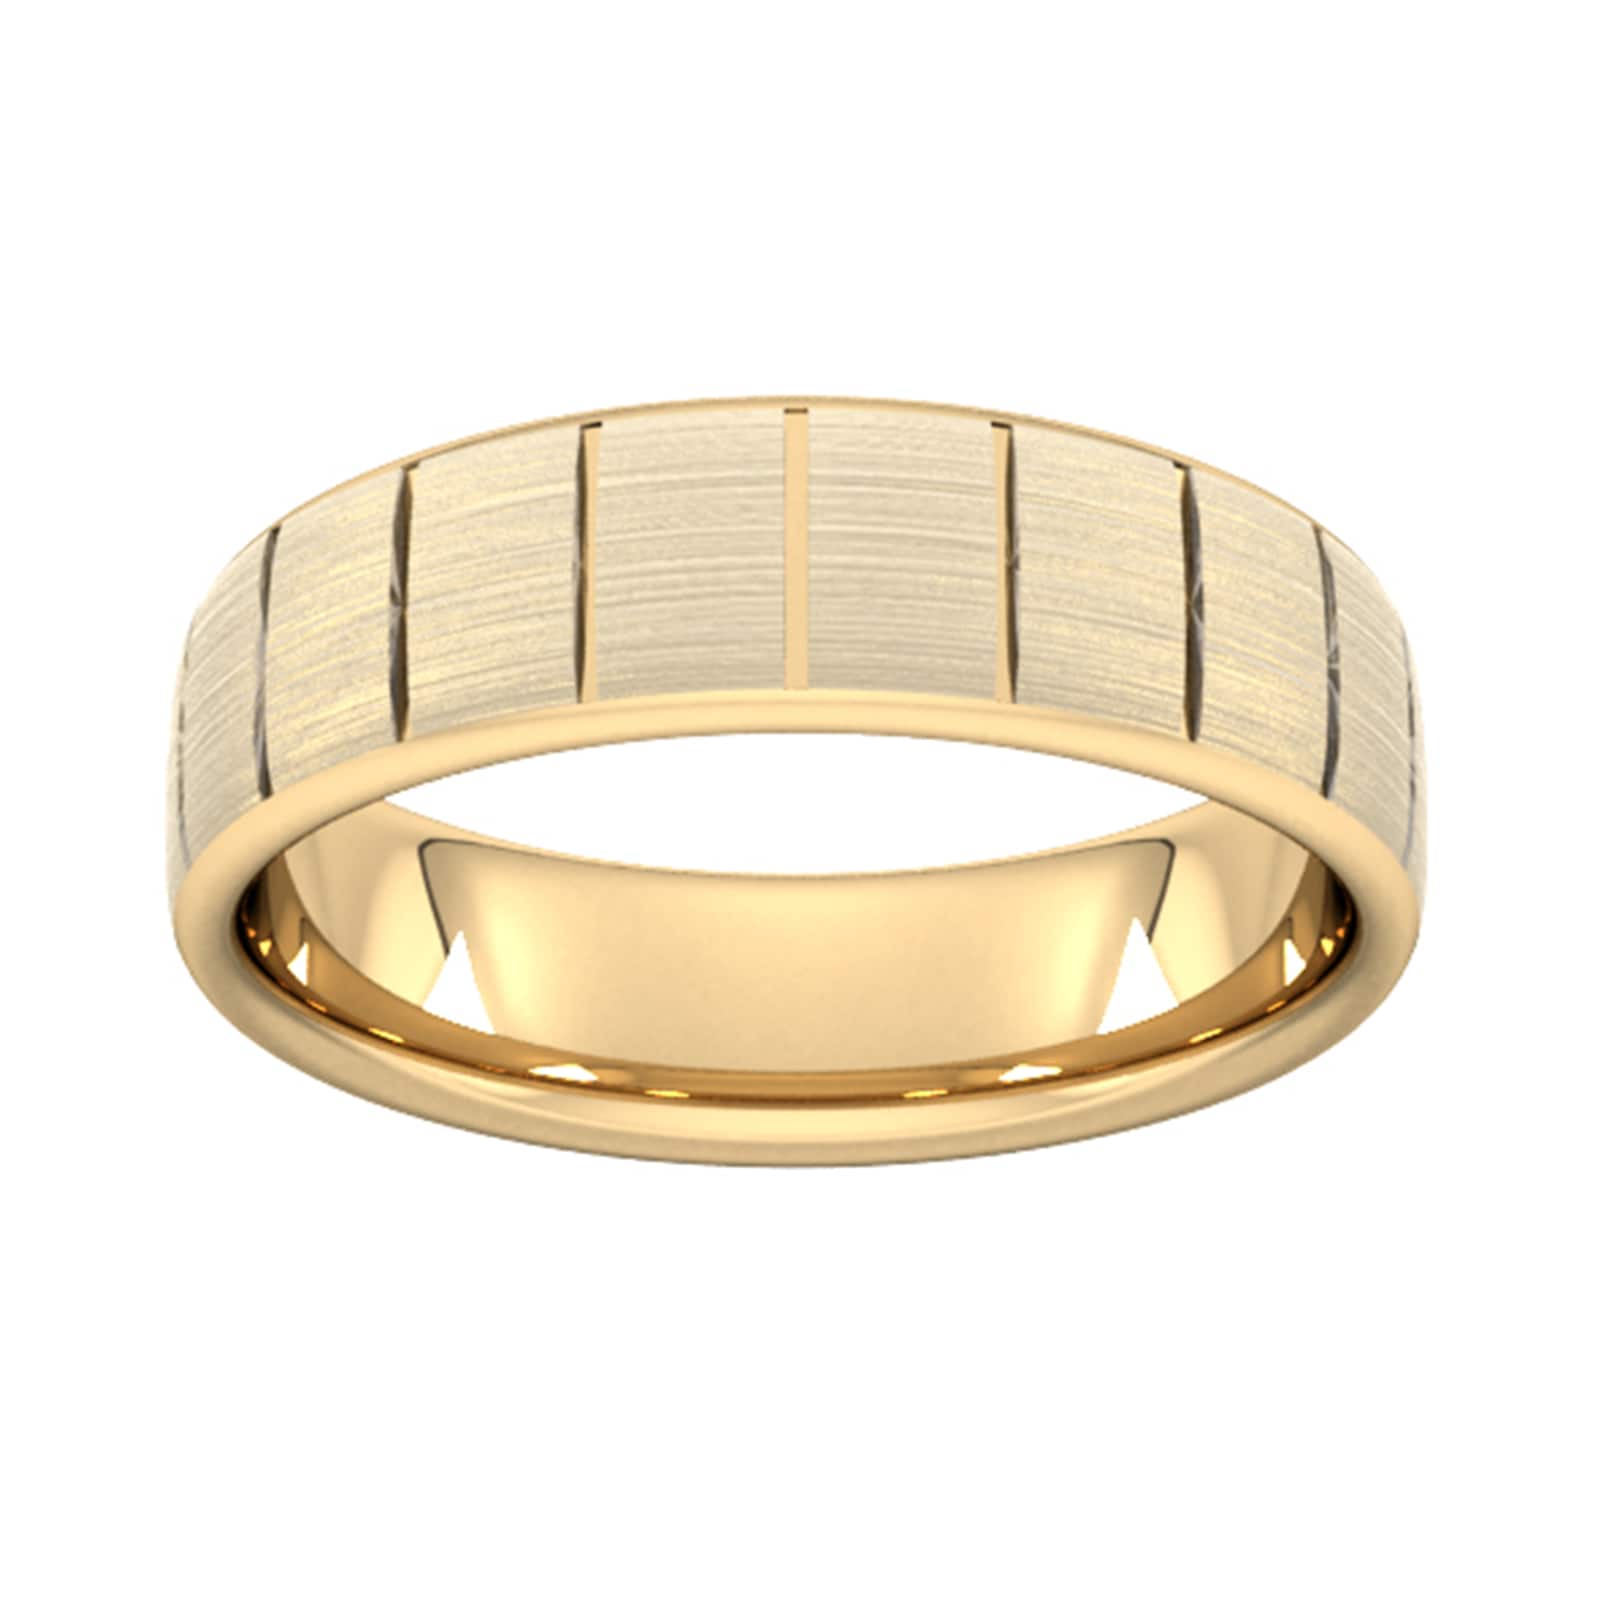 6mm Slight Court Heavy Vertical Lines Wedding Ring In 18 Carat Yellow Gold - Ring Size K